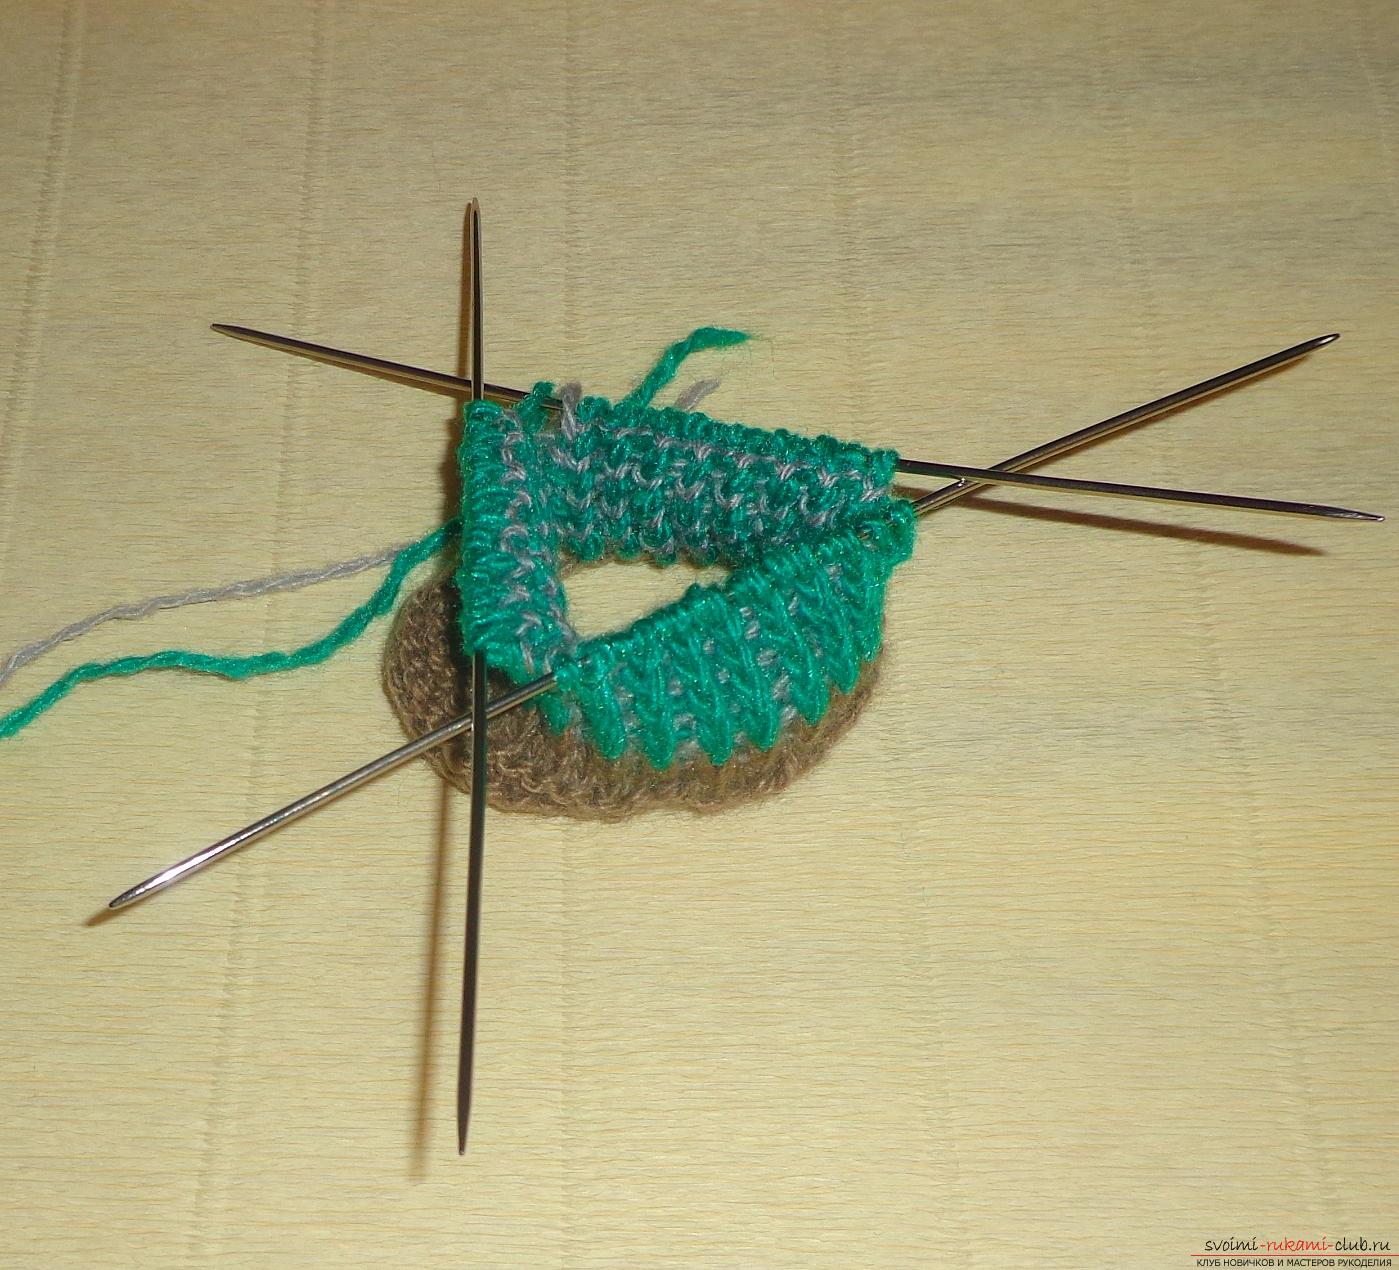 Photos for a lesson on knitting on knitting needles for a boy. Photo №5